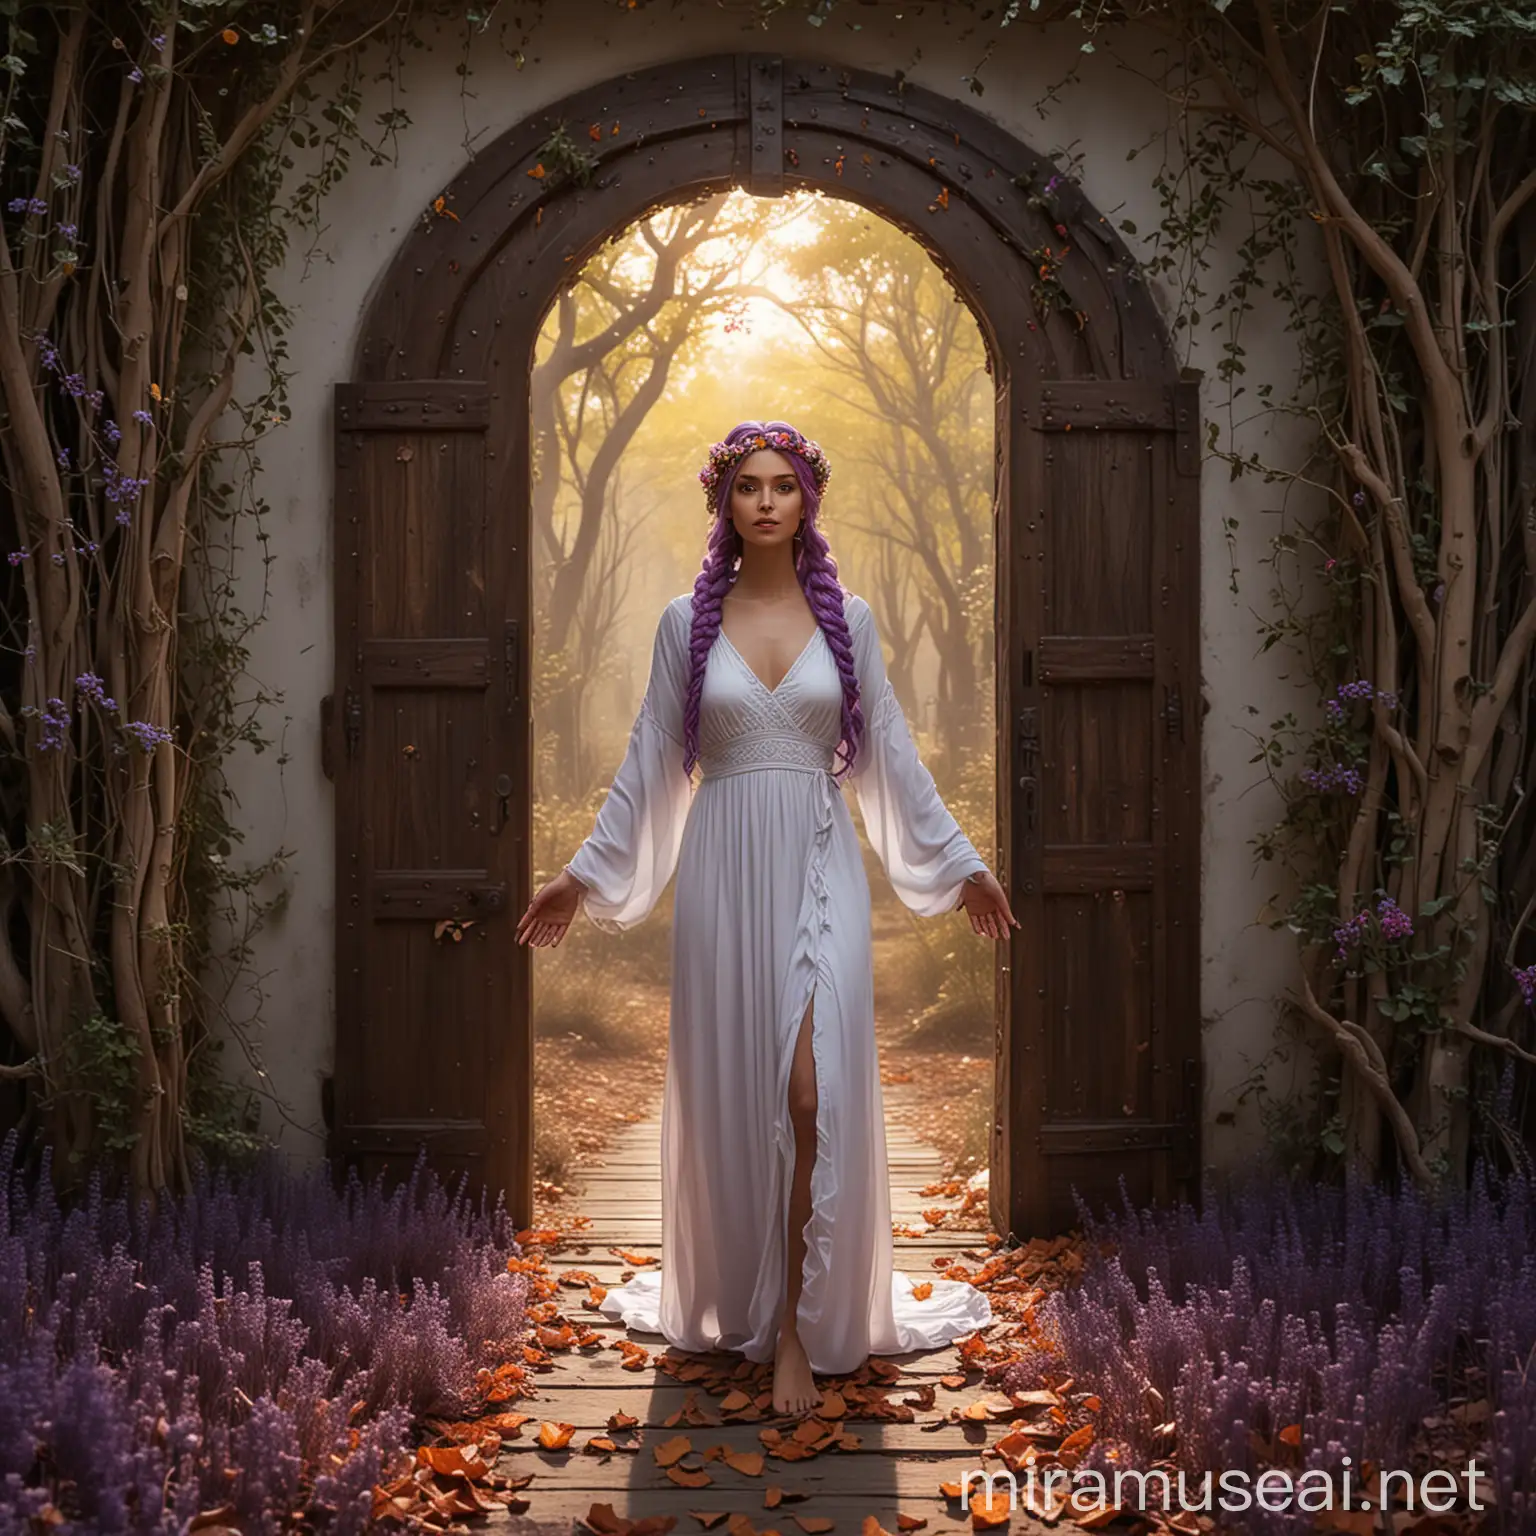 Create a hyper-realistic, 8K image of aN ARAB beautiful woman with colorful hair styled in braids, stands in the center of a wooden door that is engulfed in TWINES LEAVE AND BIG VIOLET AND LAVENDER FLOWERS WITH DIFFERNT SHARE OF ROSE, The door, which appears to be set within a forest, is surrounded by a thick, fiery halo that seems to be consuming the wood, The woman is dressed in a white, FULL sleeve dress and stands barefoot on the ground, her body positioned straight with her arms at her sides, AND HAVE 2 OPEN WINGS ON BOTH THE SIDE OF HER .Her expression is neutral, and she gazes directly at the camera, The surrounding environment is dimly lit, suggesting it might be dusk or dawn, and the forest floor is covered with fallen leaves and twigs, The overall atmosphere is eerie and otherworldly